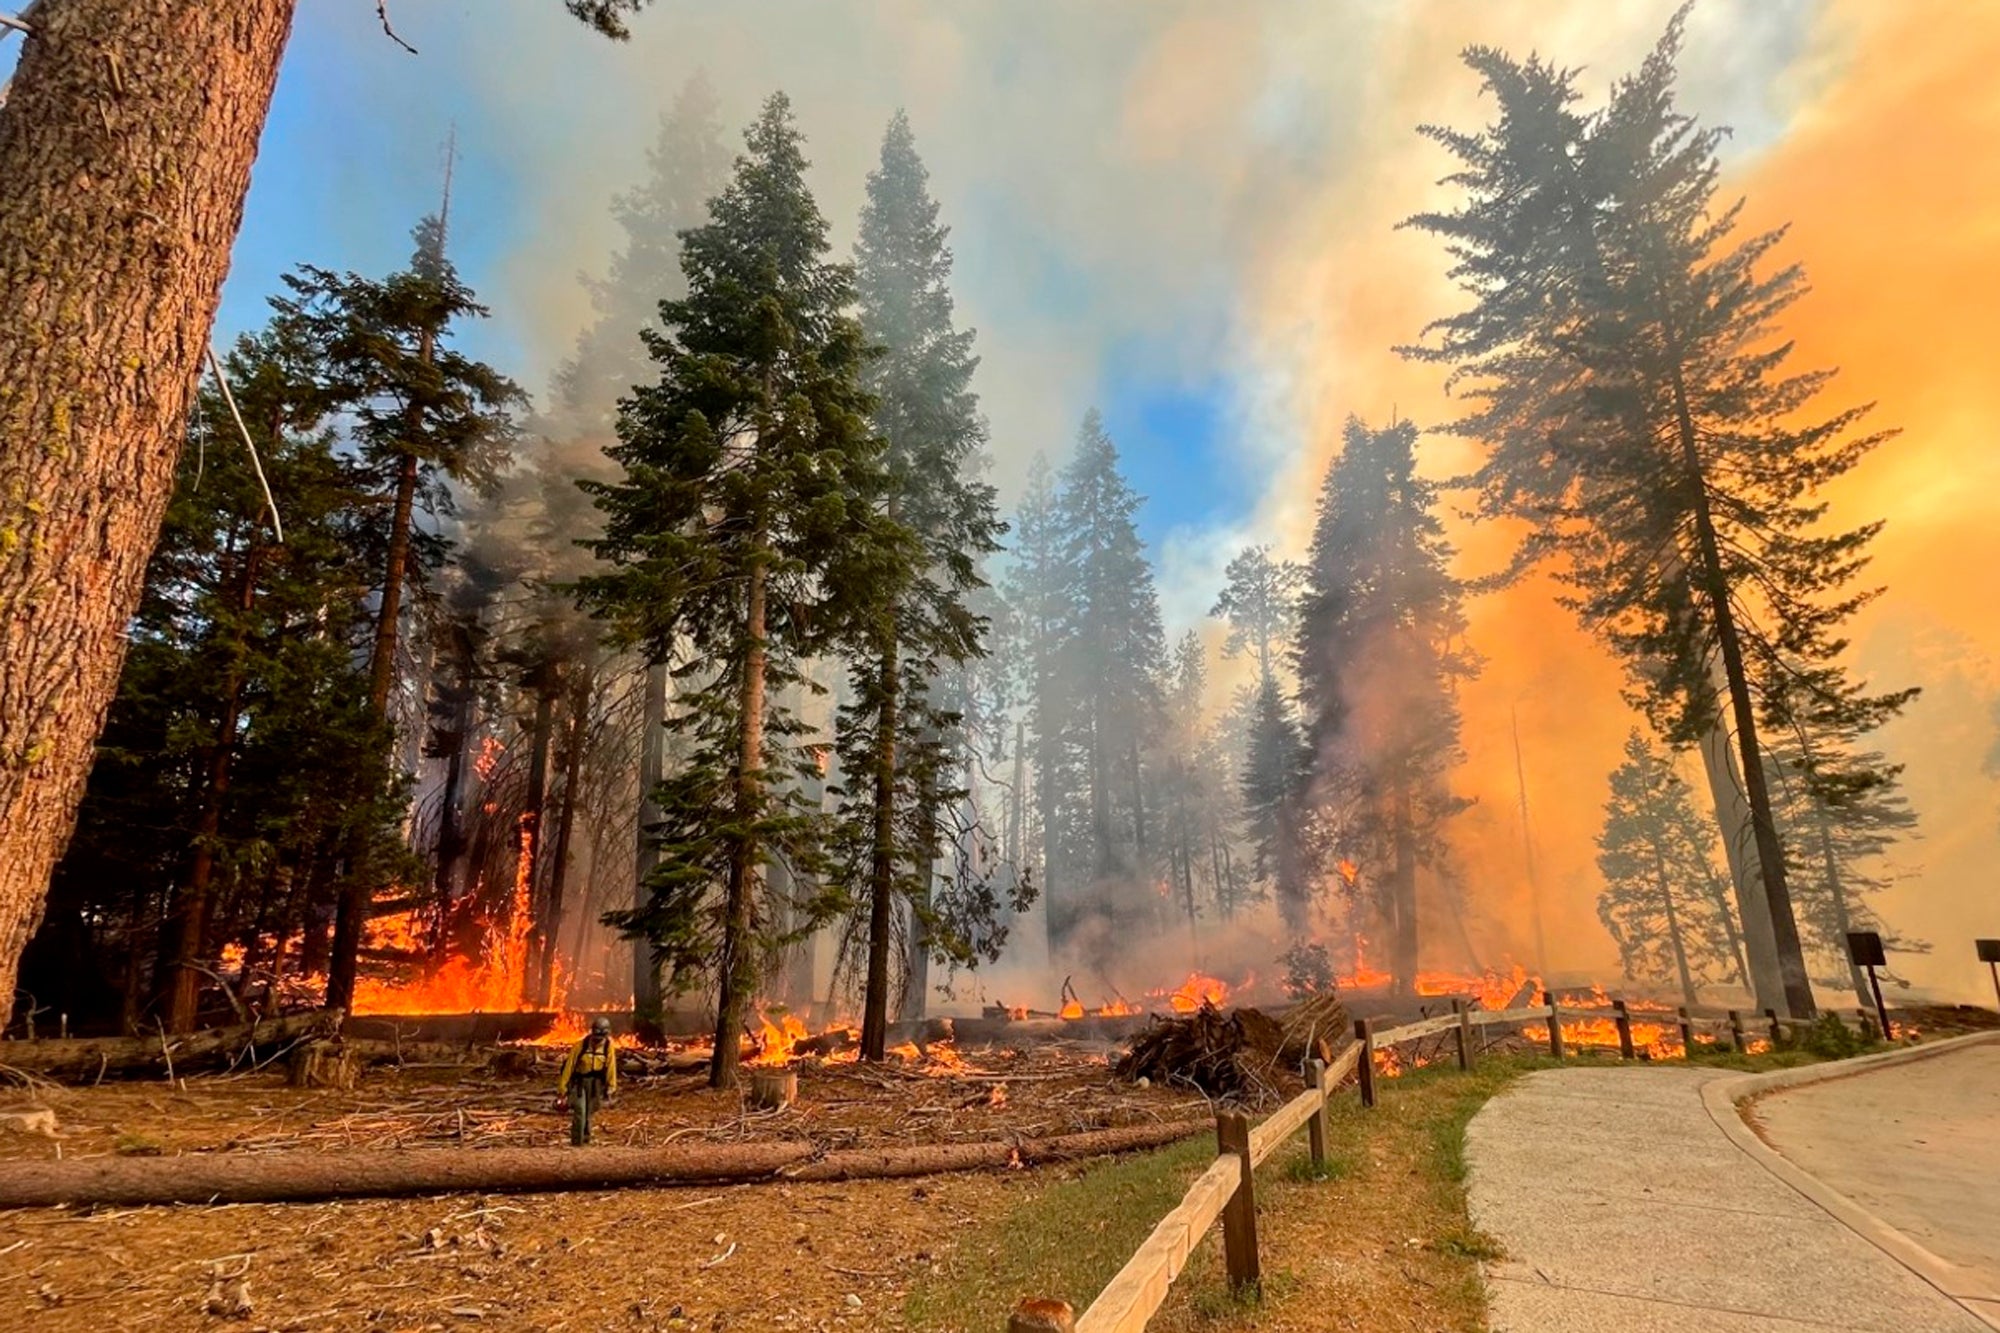 A firefighter walks near the Mariposa Grove as the Washburn Fire burns in Yosemite National Park on Thursday, July 7. (Photo: National Park Service, AP)